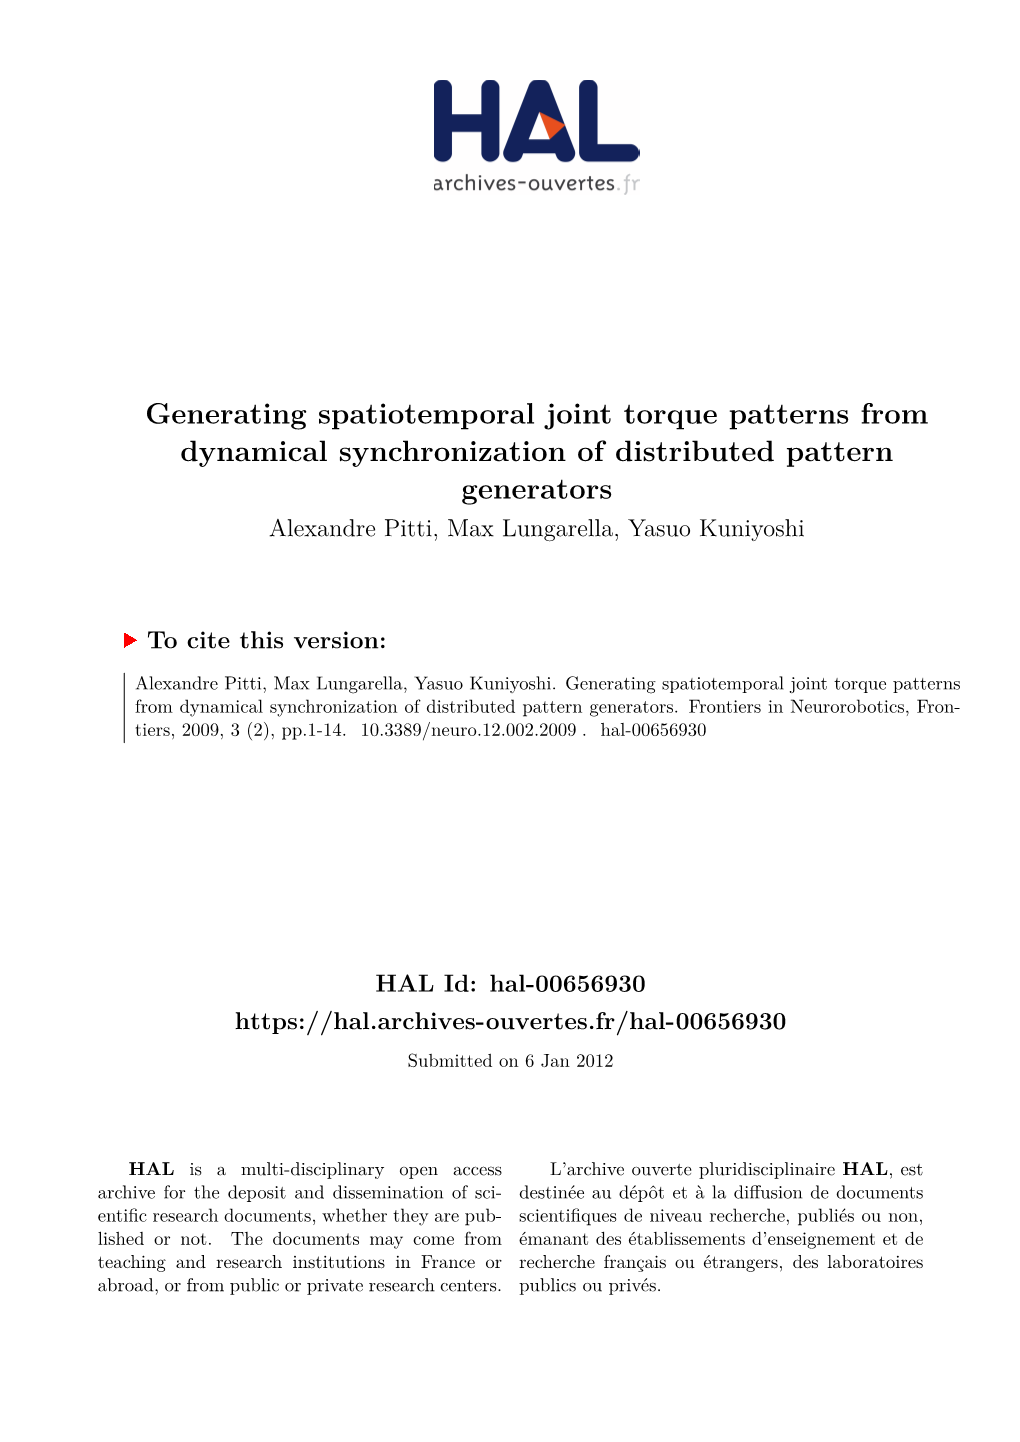 Generating Spatiotemporal Joint Torque Patterns from Dynamical Synchronization of Distributed Pattern Generators Alexandre Pitti, Max Lungarella, Yasuo Kuniyoshi